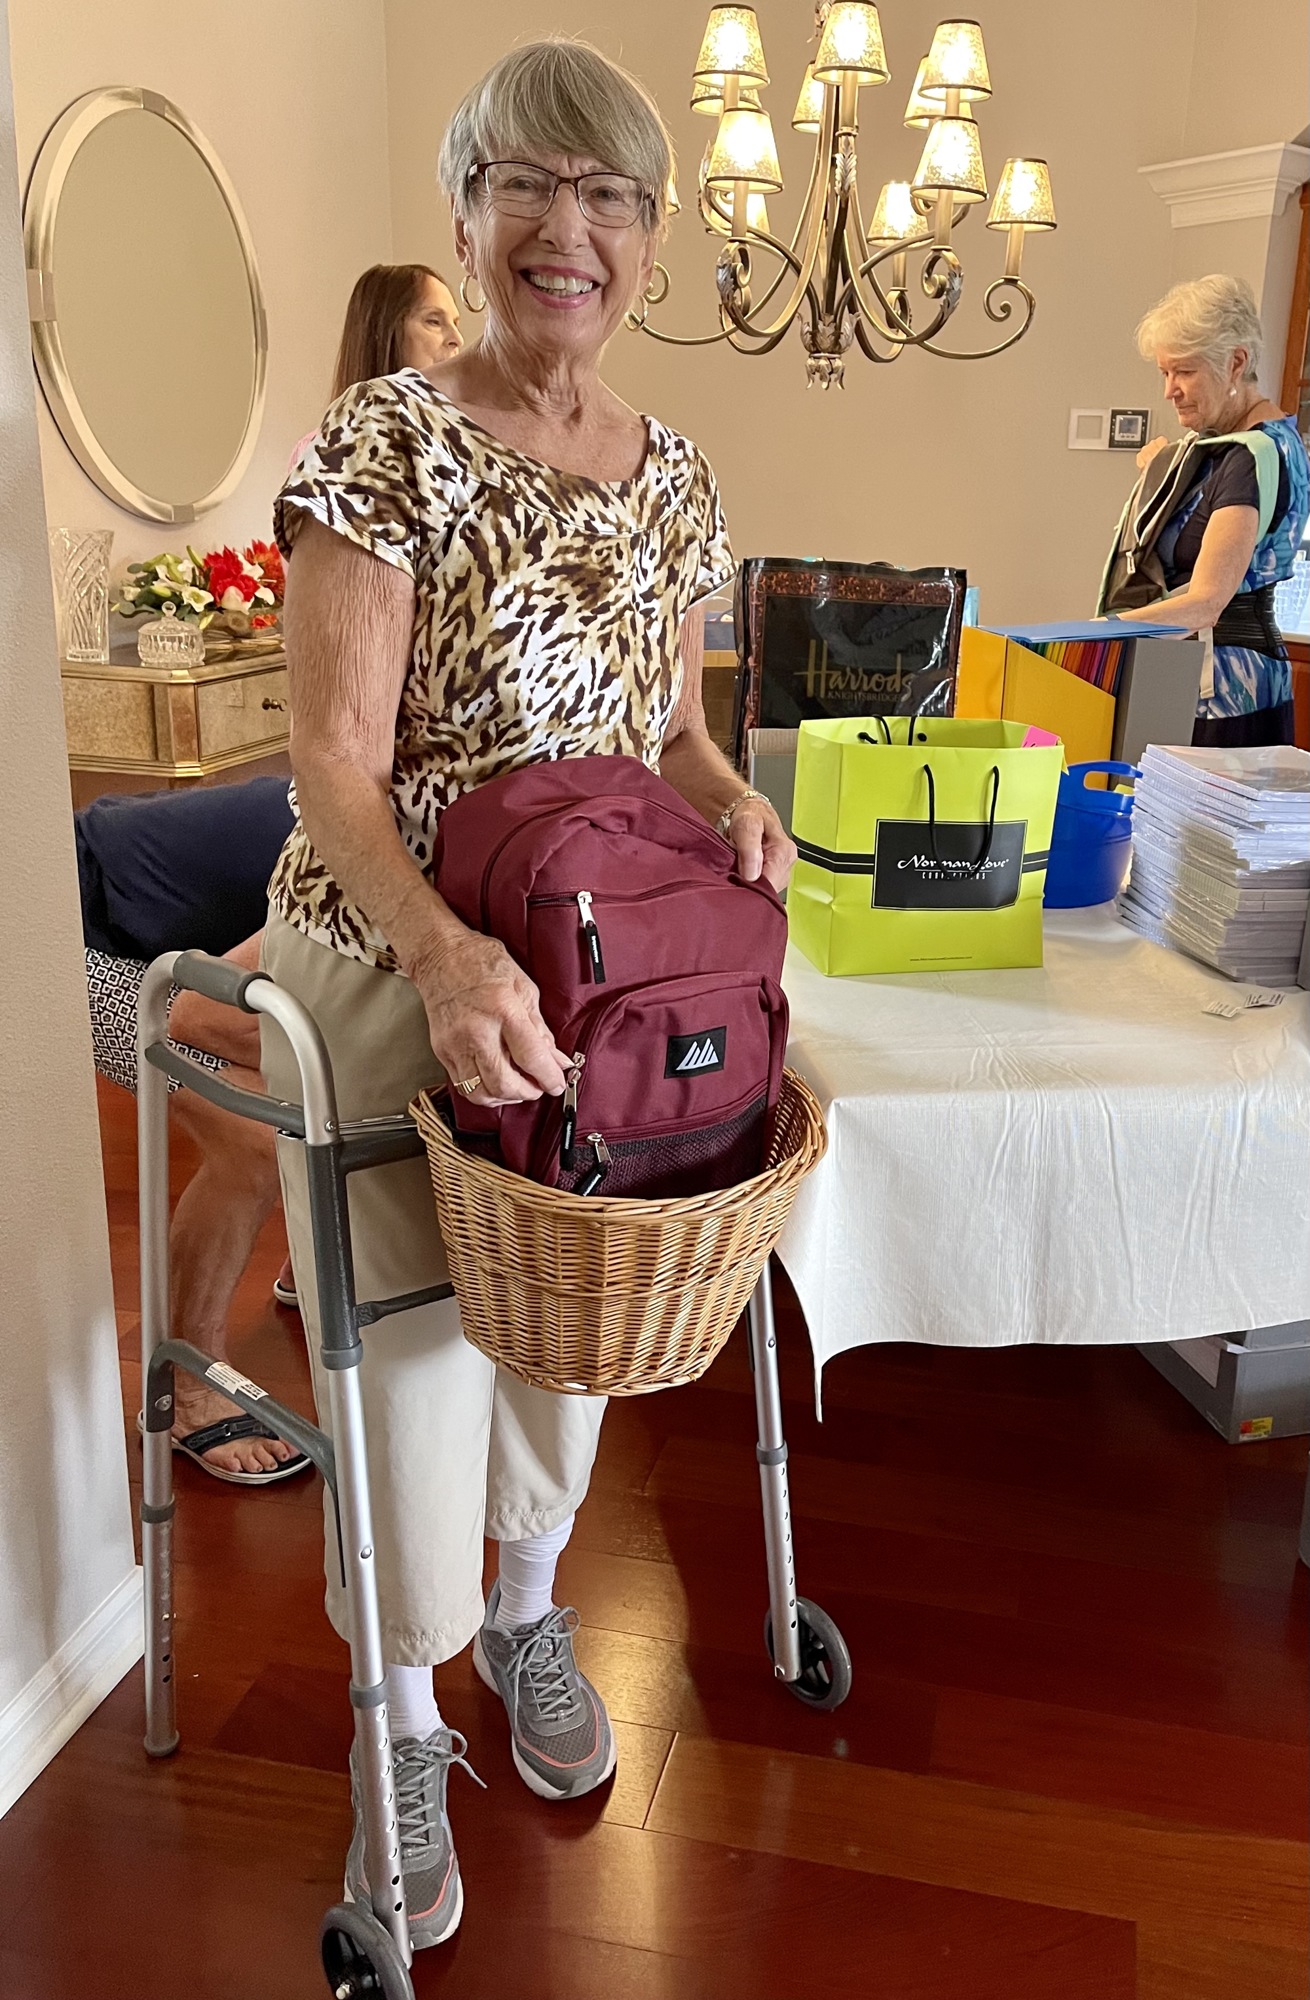 Lakewood Ranch's Dianne Emmermann insists on helping with stuffing backpacks even after having knee surgery. Courtesy photo.